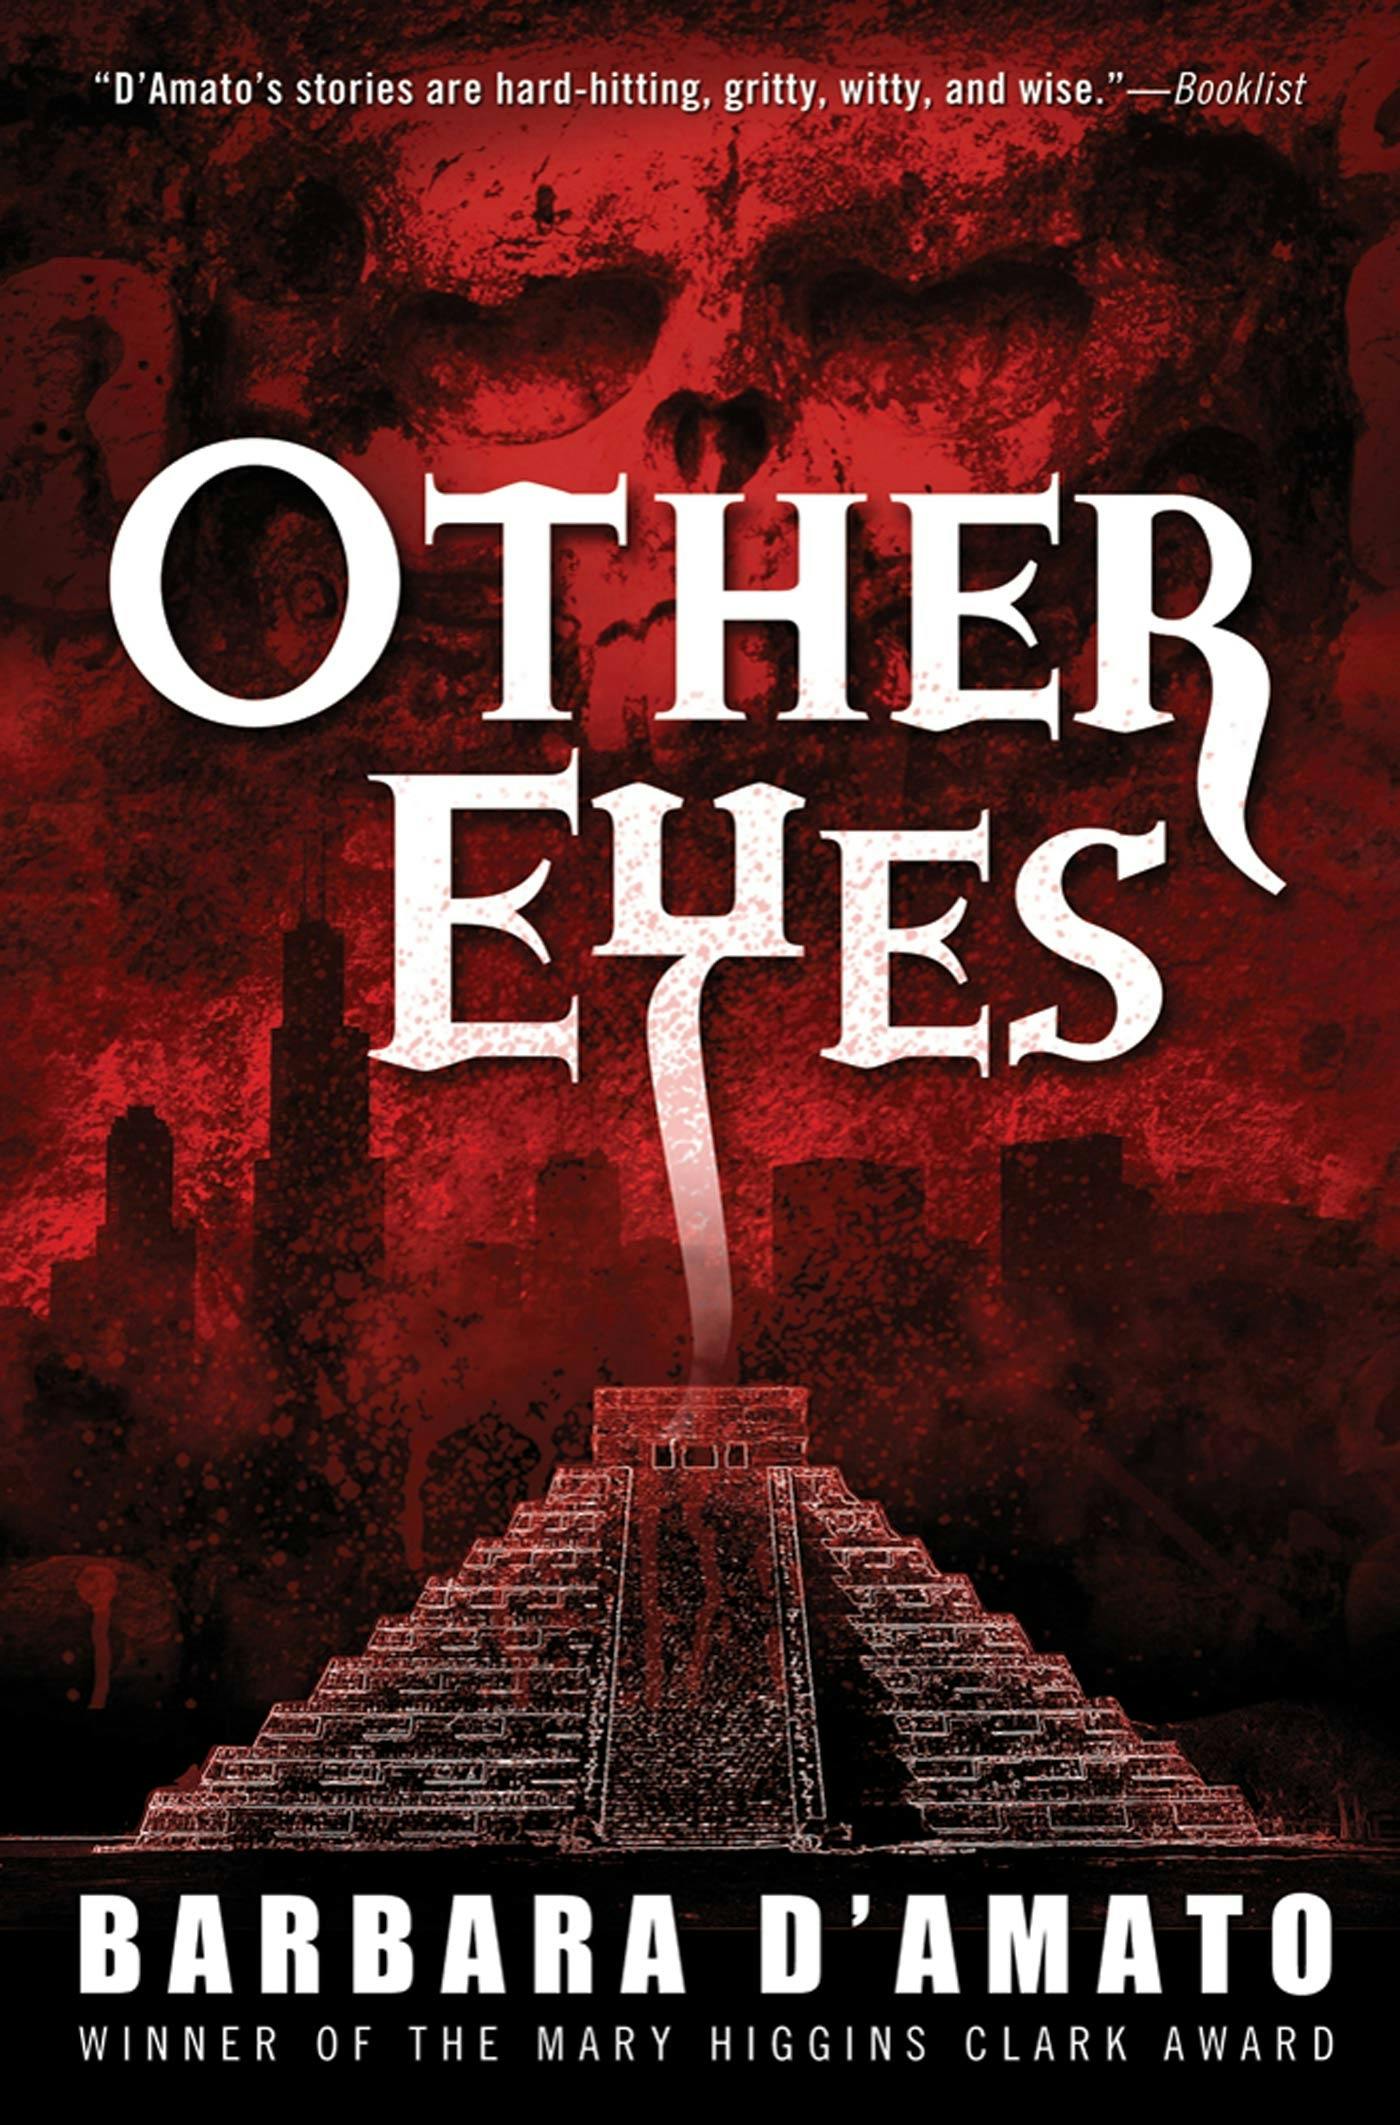 Cover for the book titled as: Other Eyes